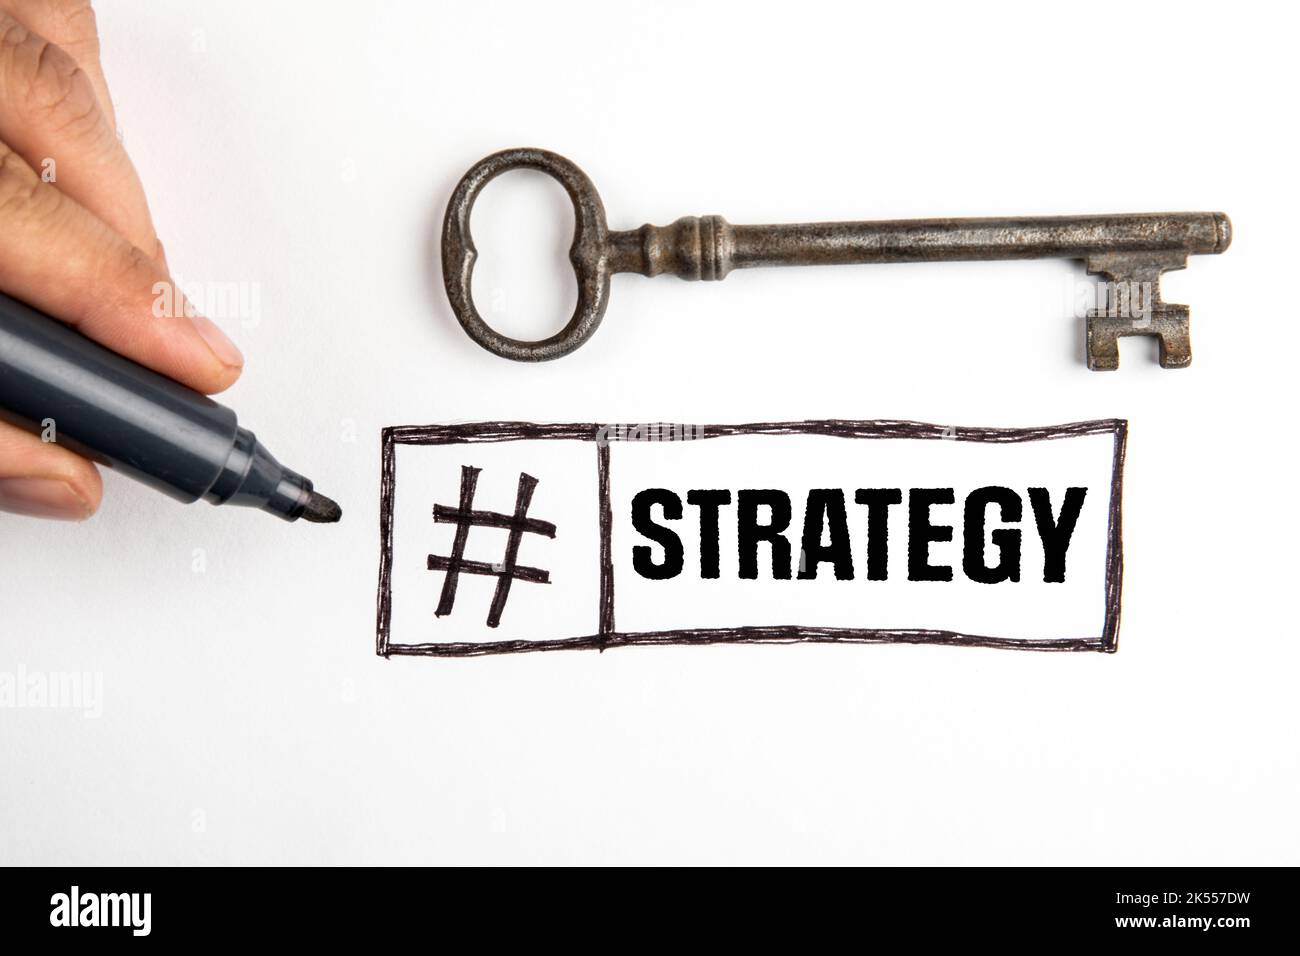 Strategy. Hashtag sign and key on a white background. Stock Photo